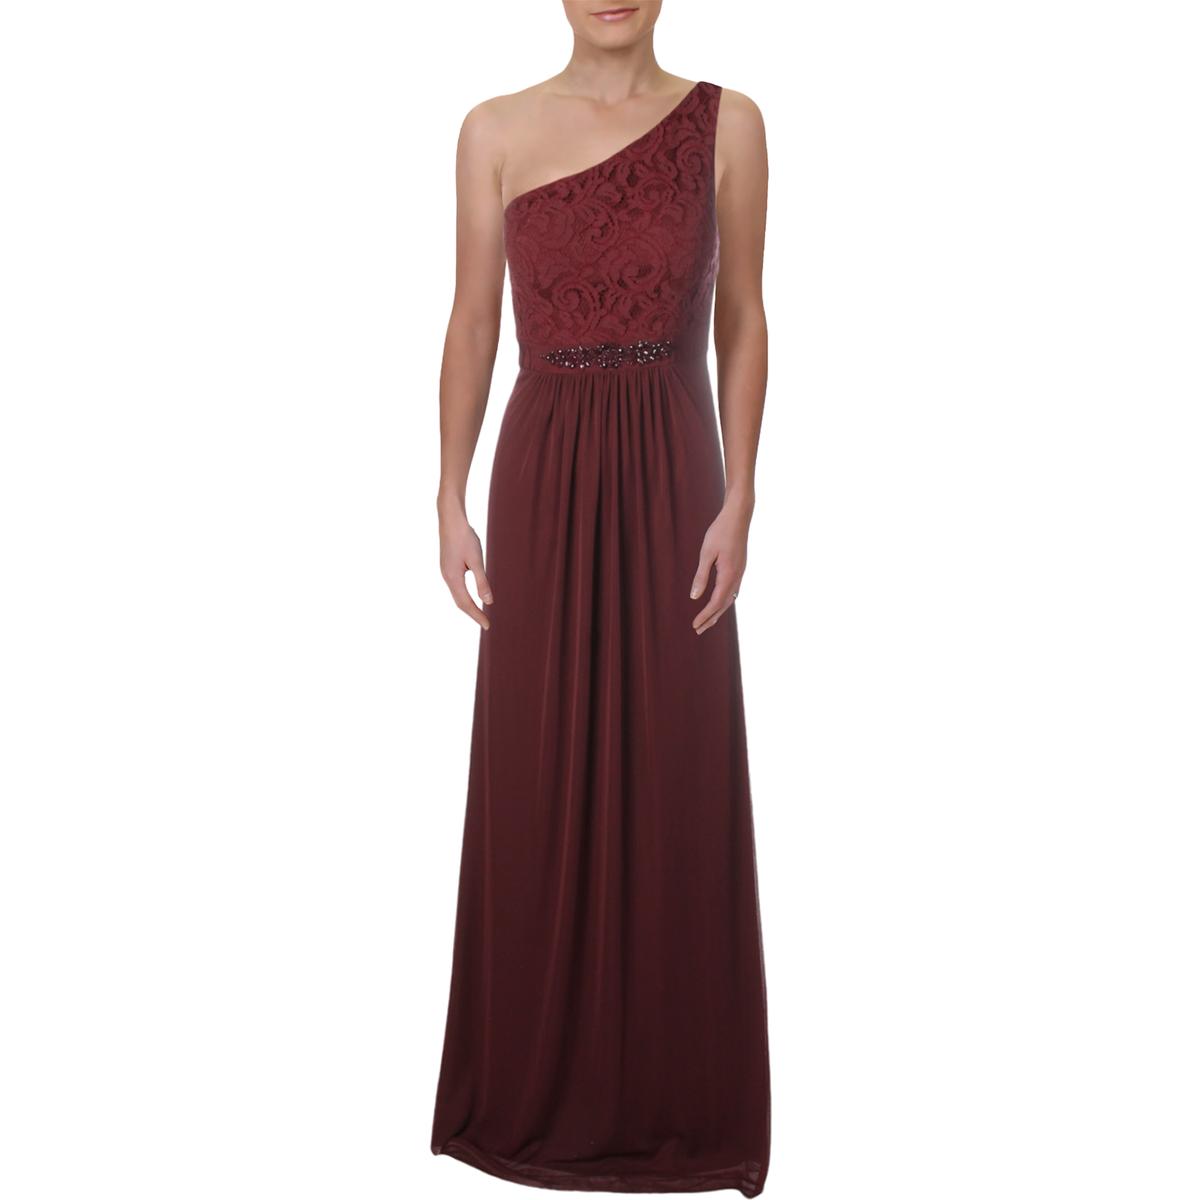 Adrianna Papell Womens Red One Shoulder Lace Evening Dress Gown 8 BHFO ...